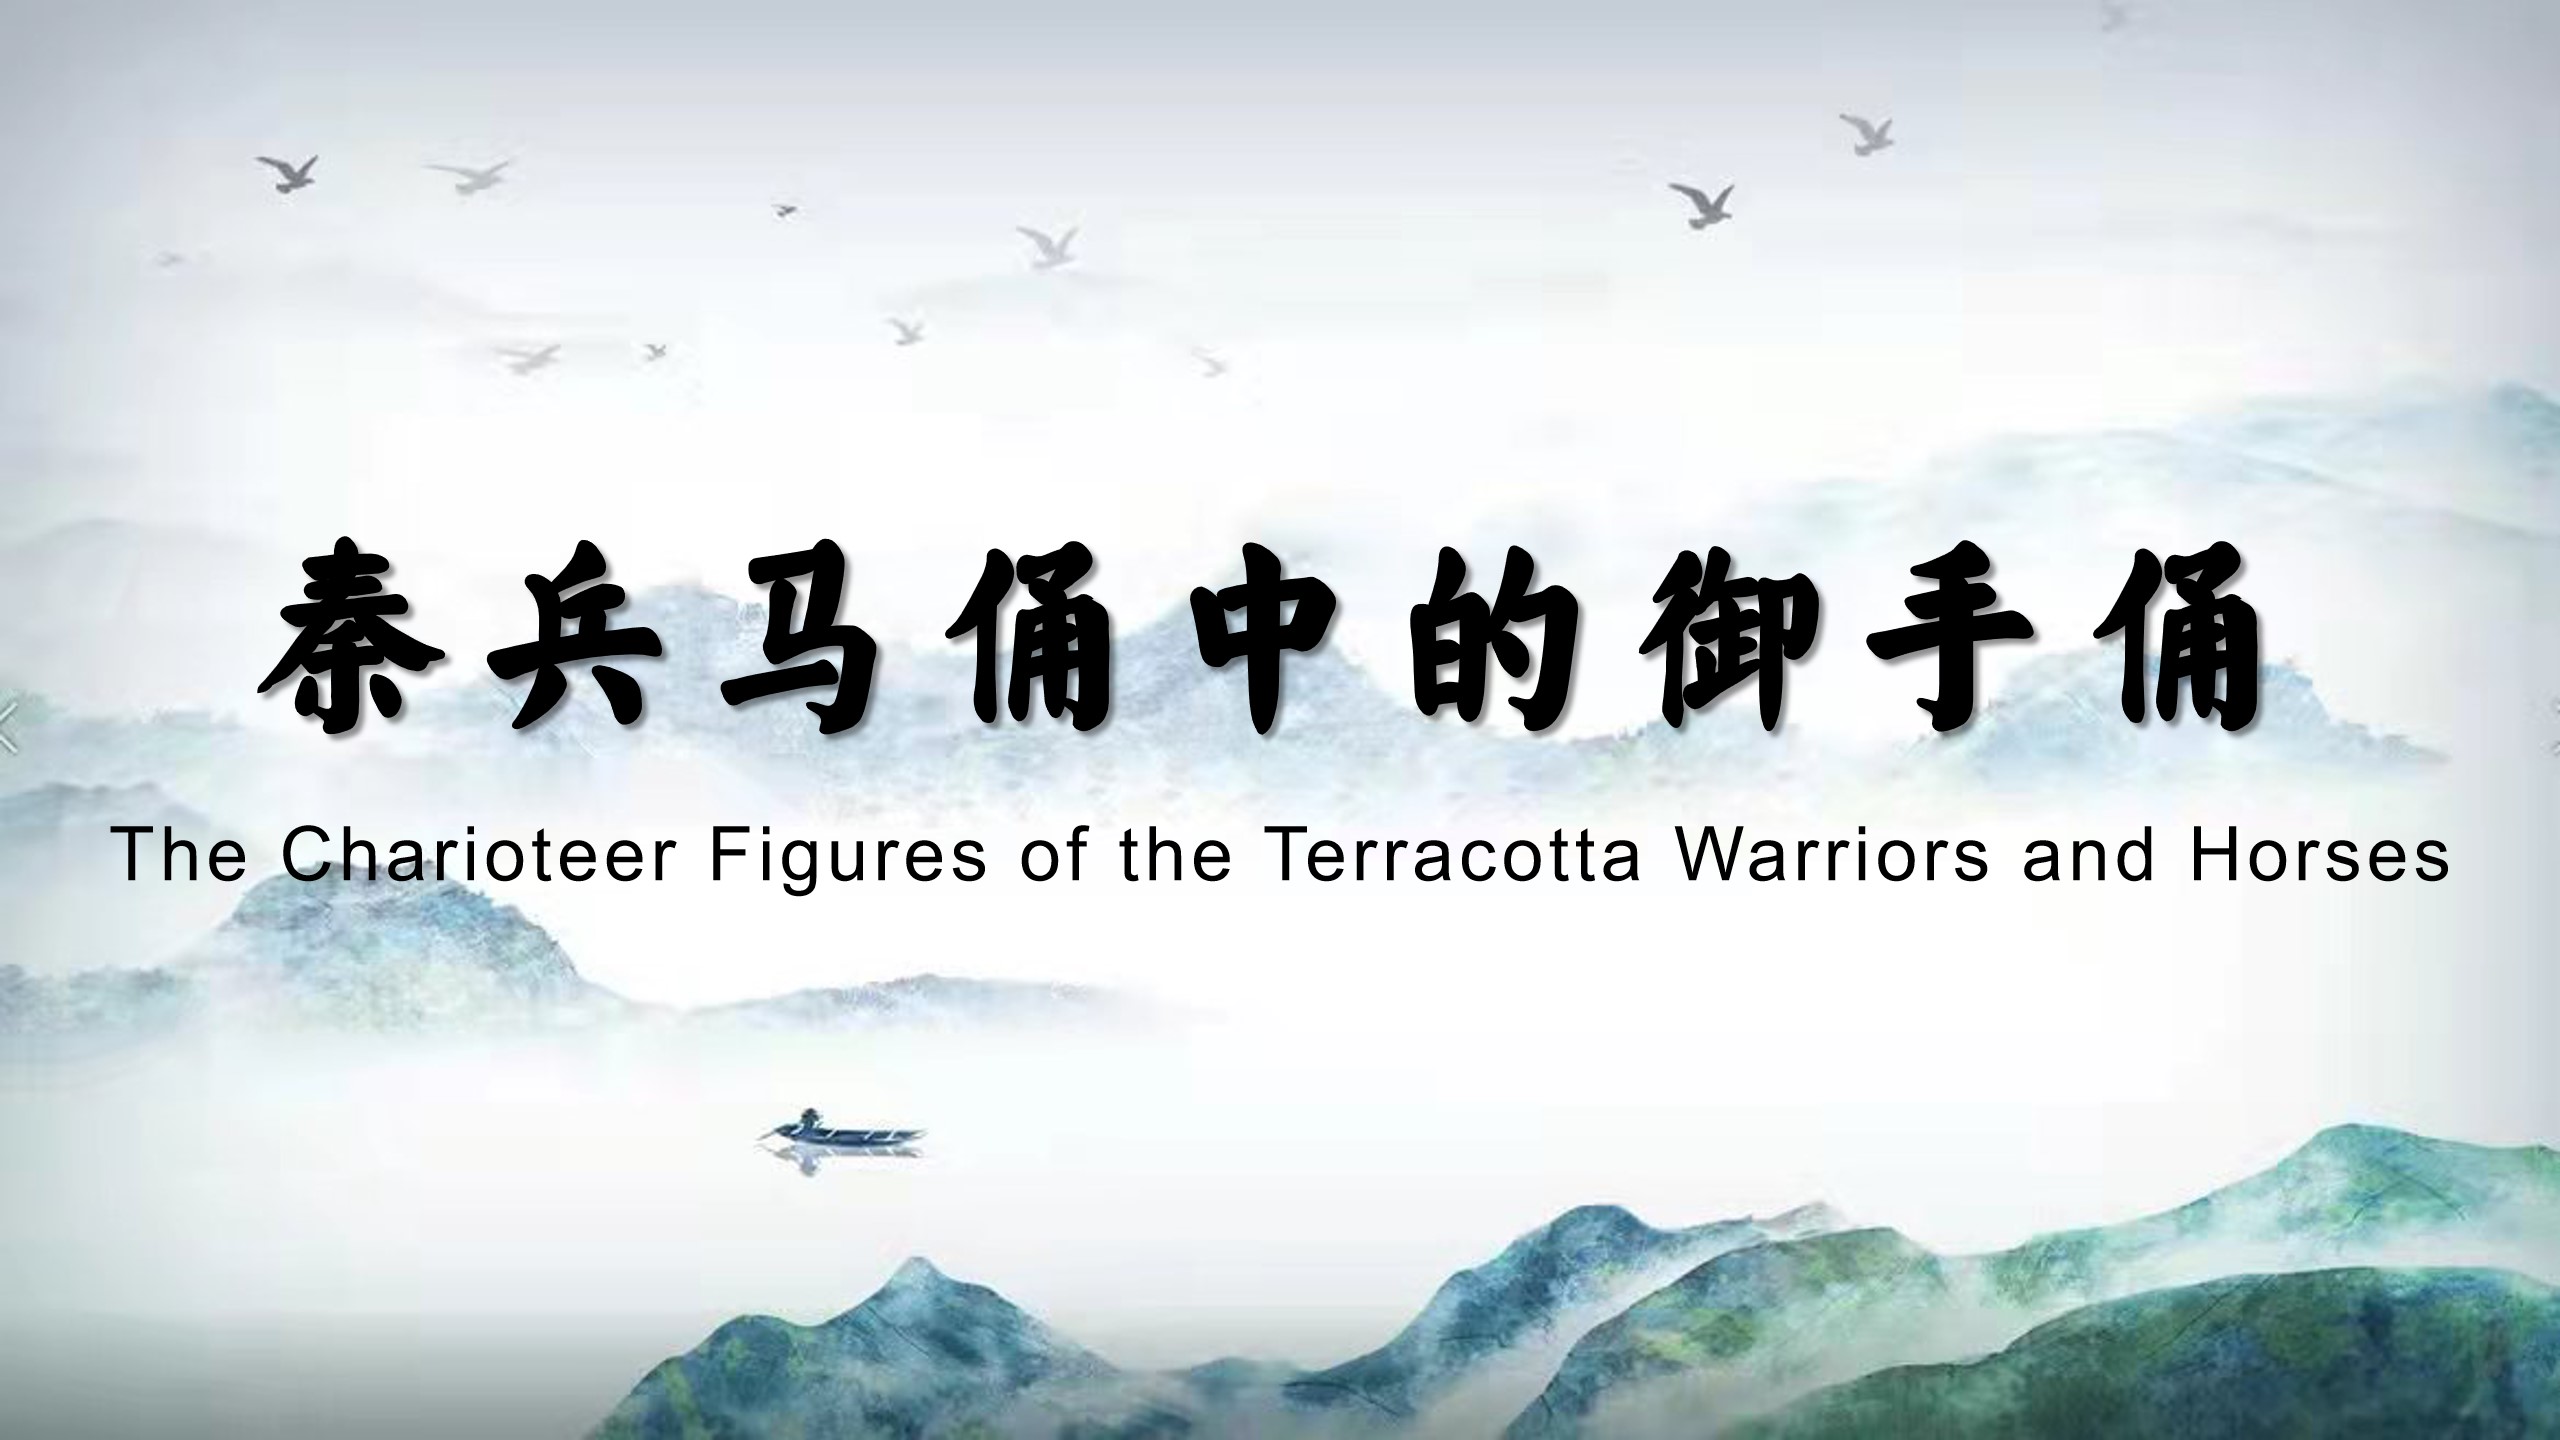 The Charioteer Figures of the Terracotta Warriors and Horses